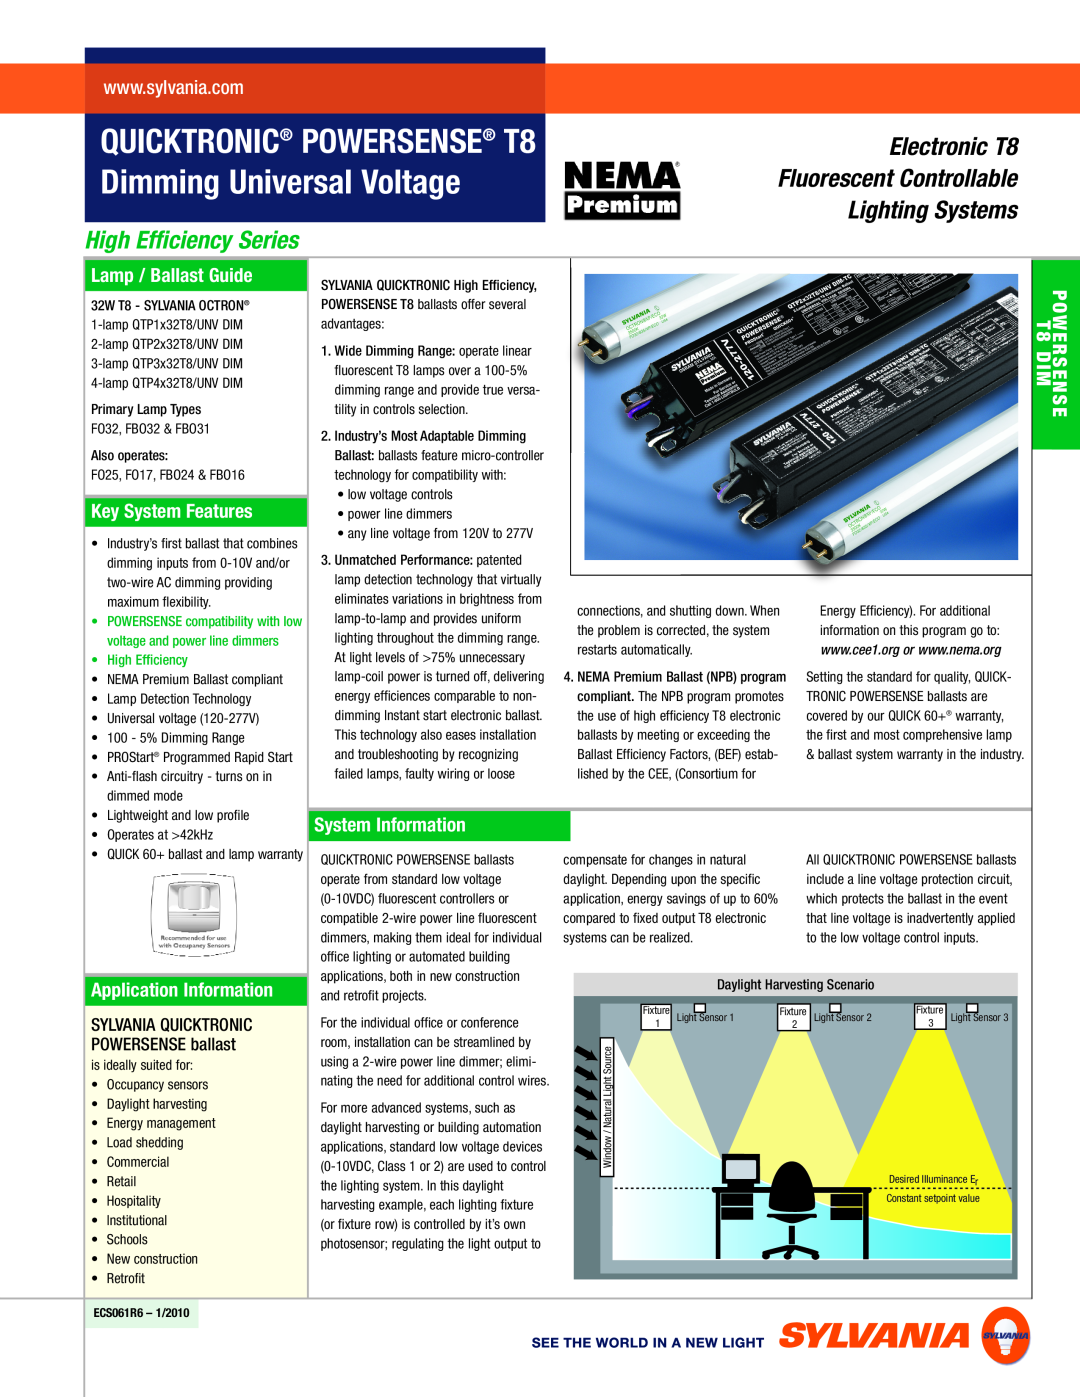 Sylvania T8 warranty Lamp / Ballast Guide, Key System Features, Application Information, System Information 